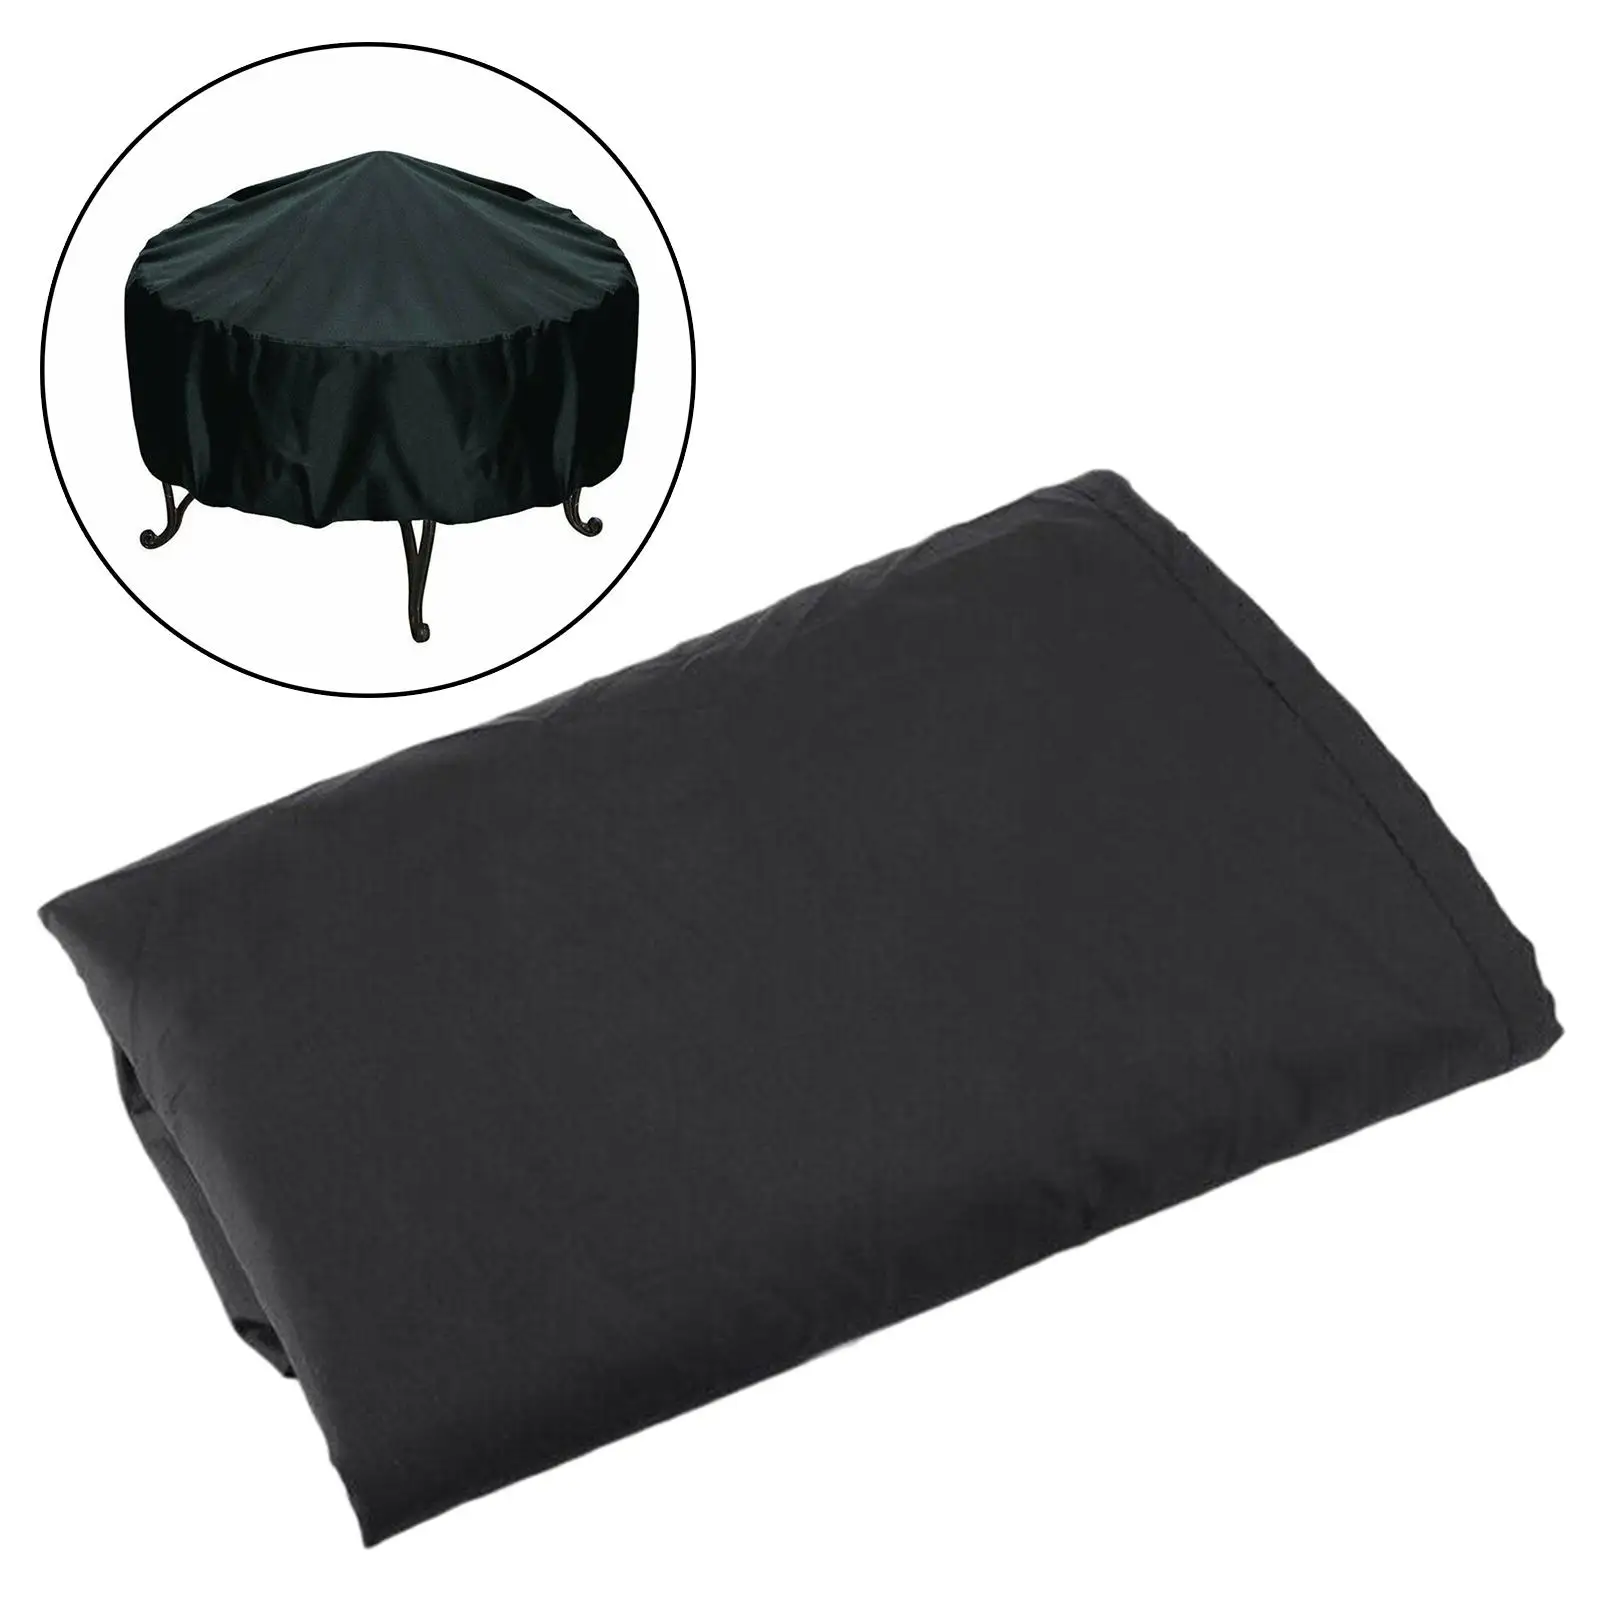 Round Barbecue Grill Cover Waterproof Windproof Foldable Dustproof Stove Shield Protective Cover for Patio camping Accessory